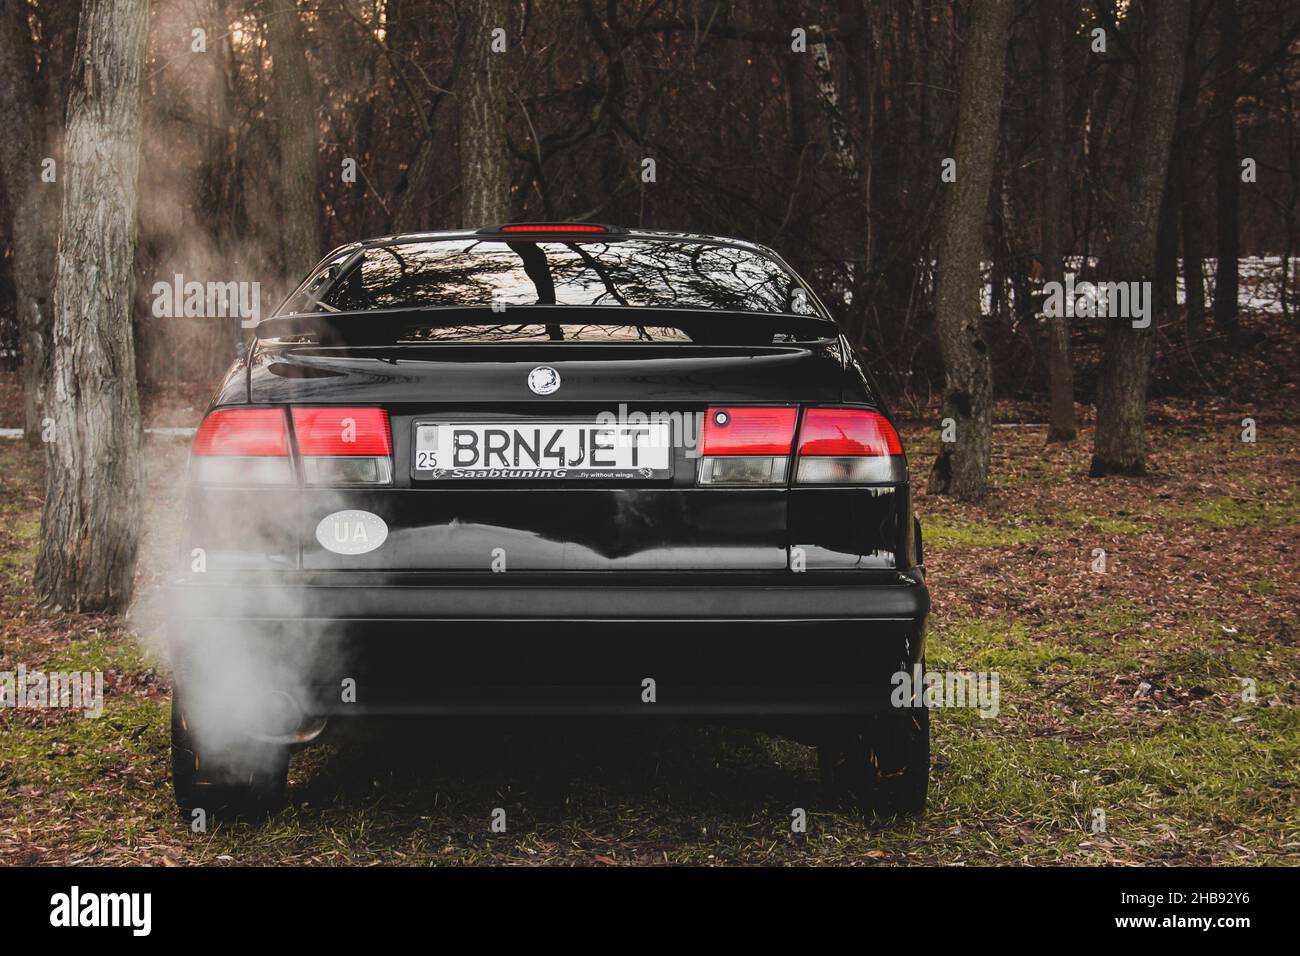 Chernihiv, Ukraine - March 20, 2021: Old Swedish car Saab 900 Turbo in the forest Stock Photo